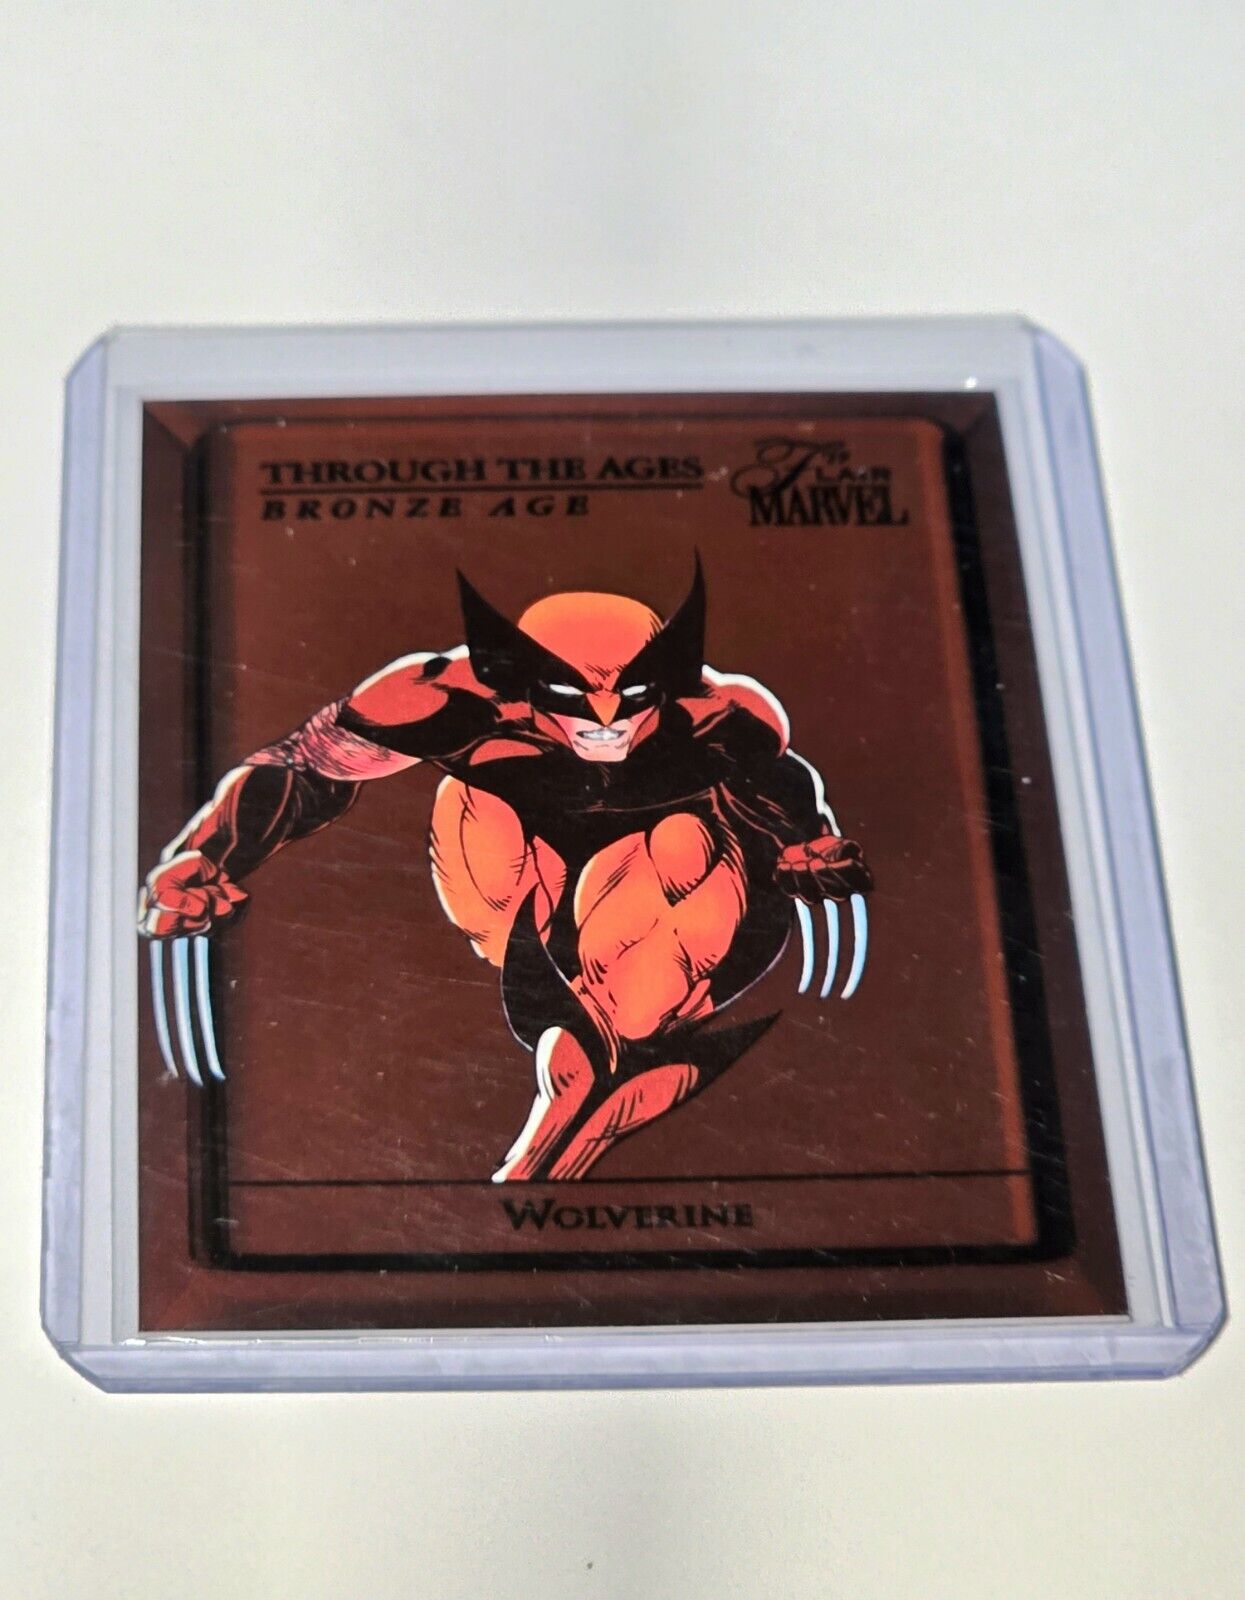 2019 Flair Marvel Through The Ages Bronze Age Wolverine # TTAB-11 Foil Card 